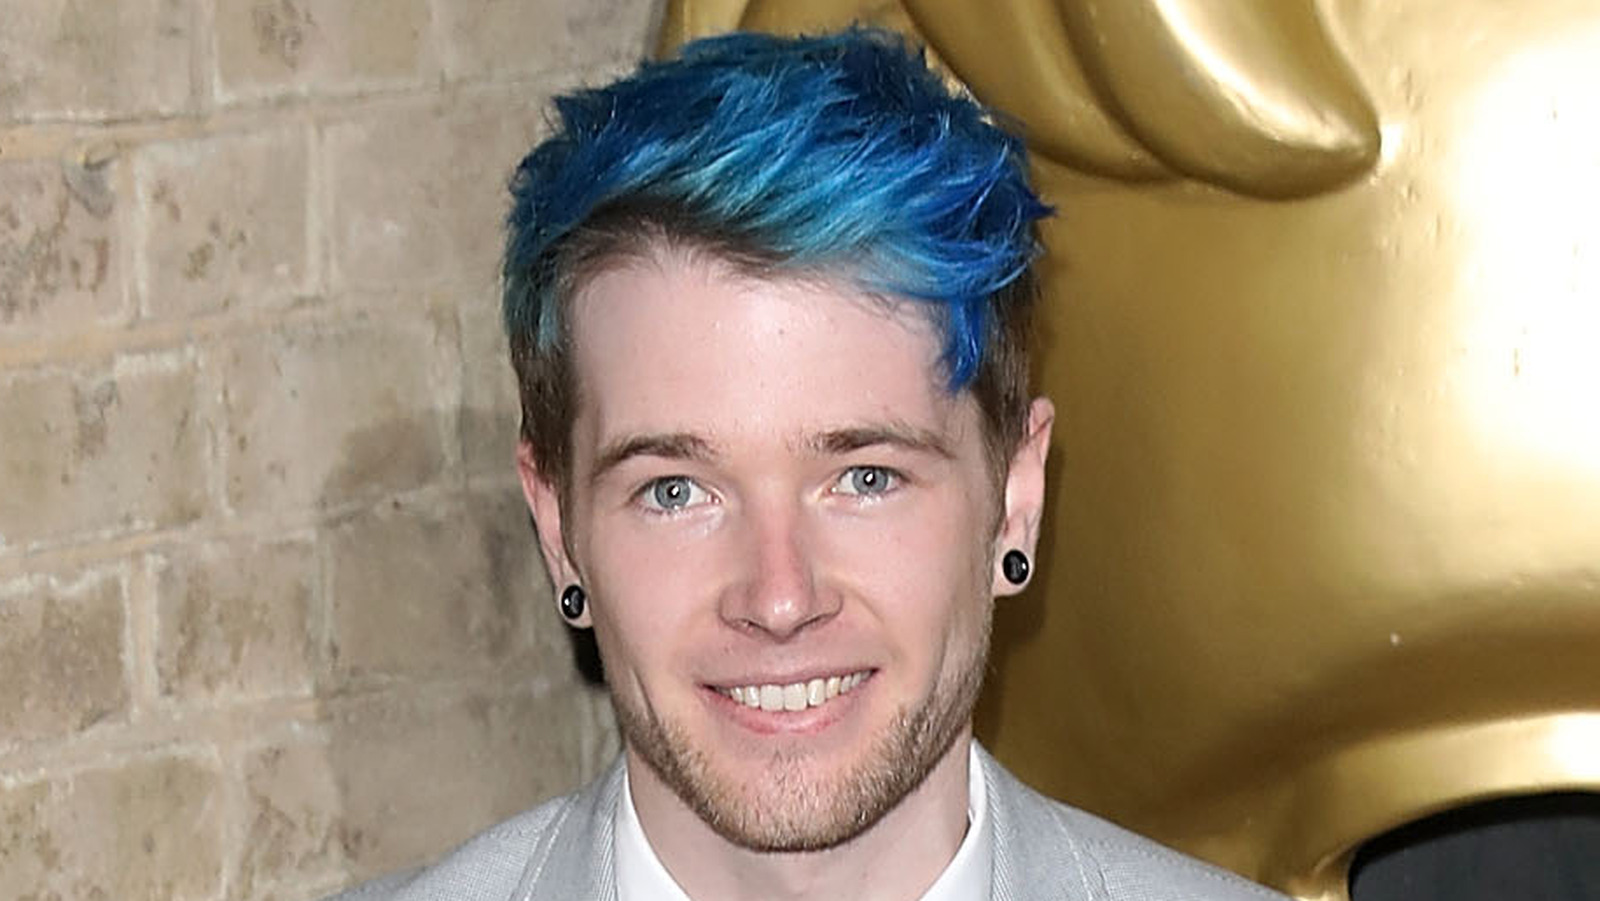 Dantdm's Hair Transformation: Blue to Pink! - wide 3